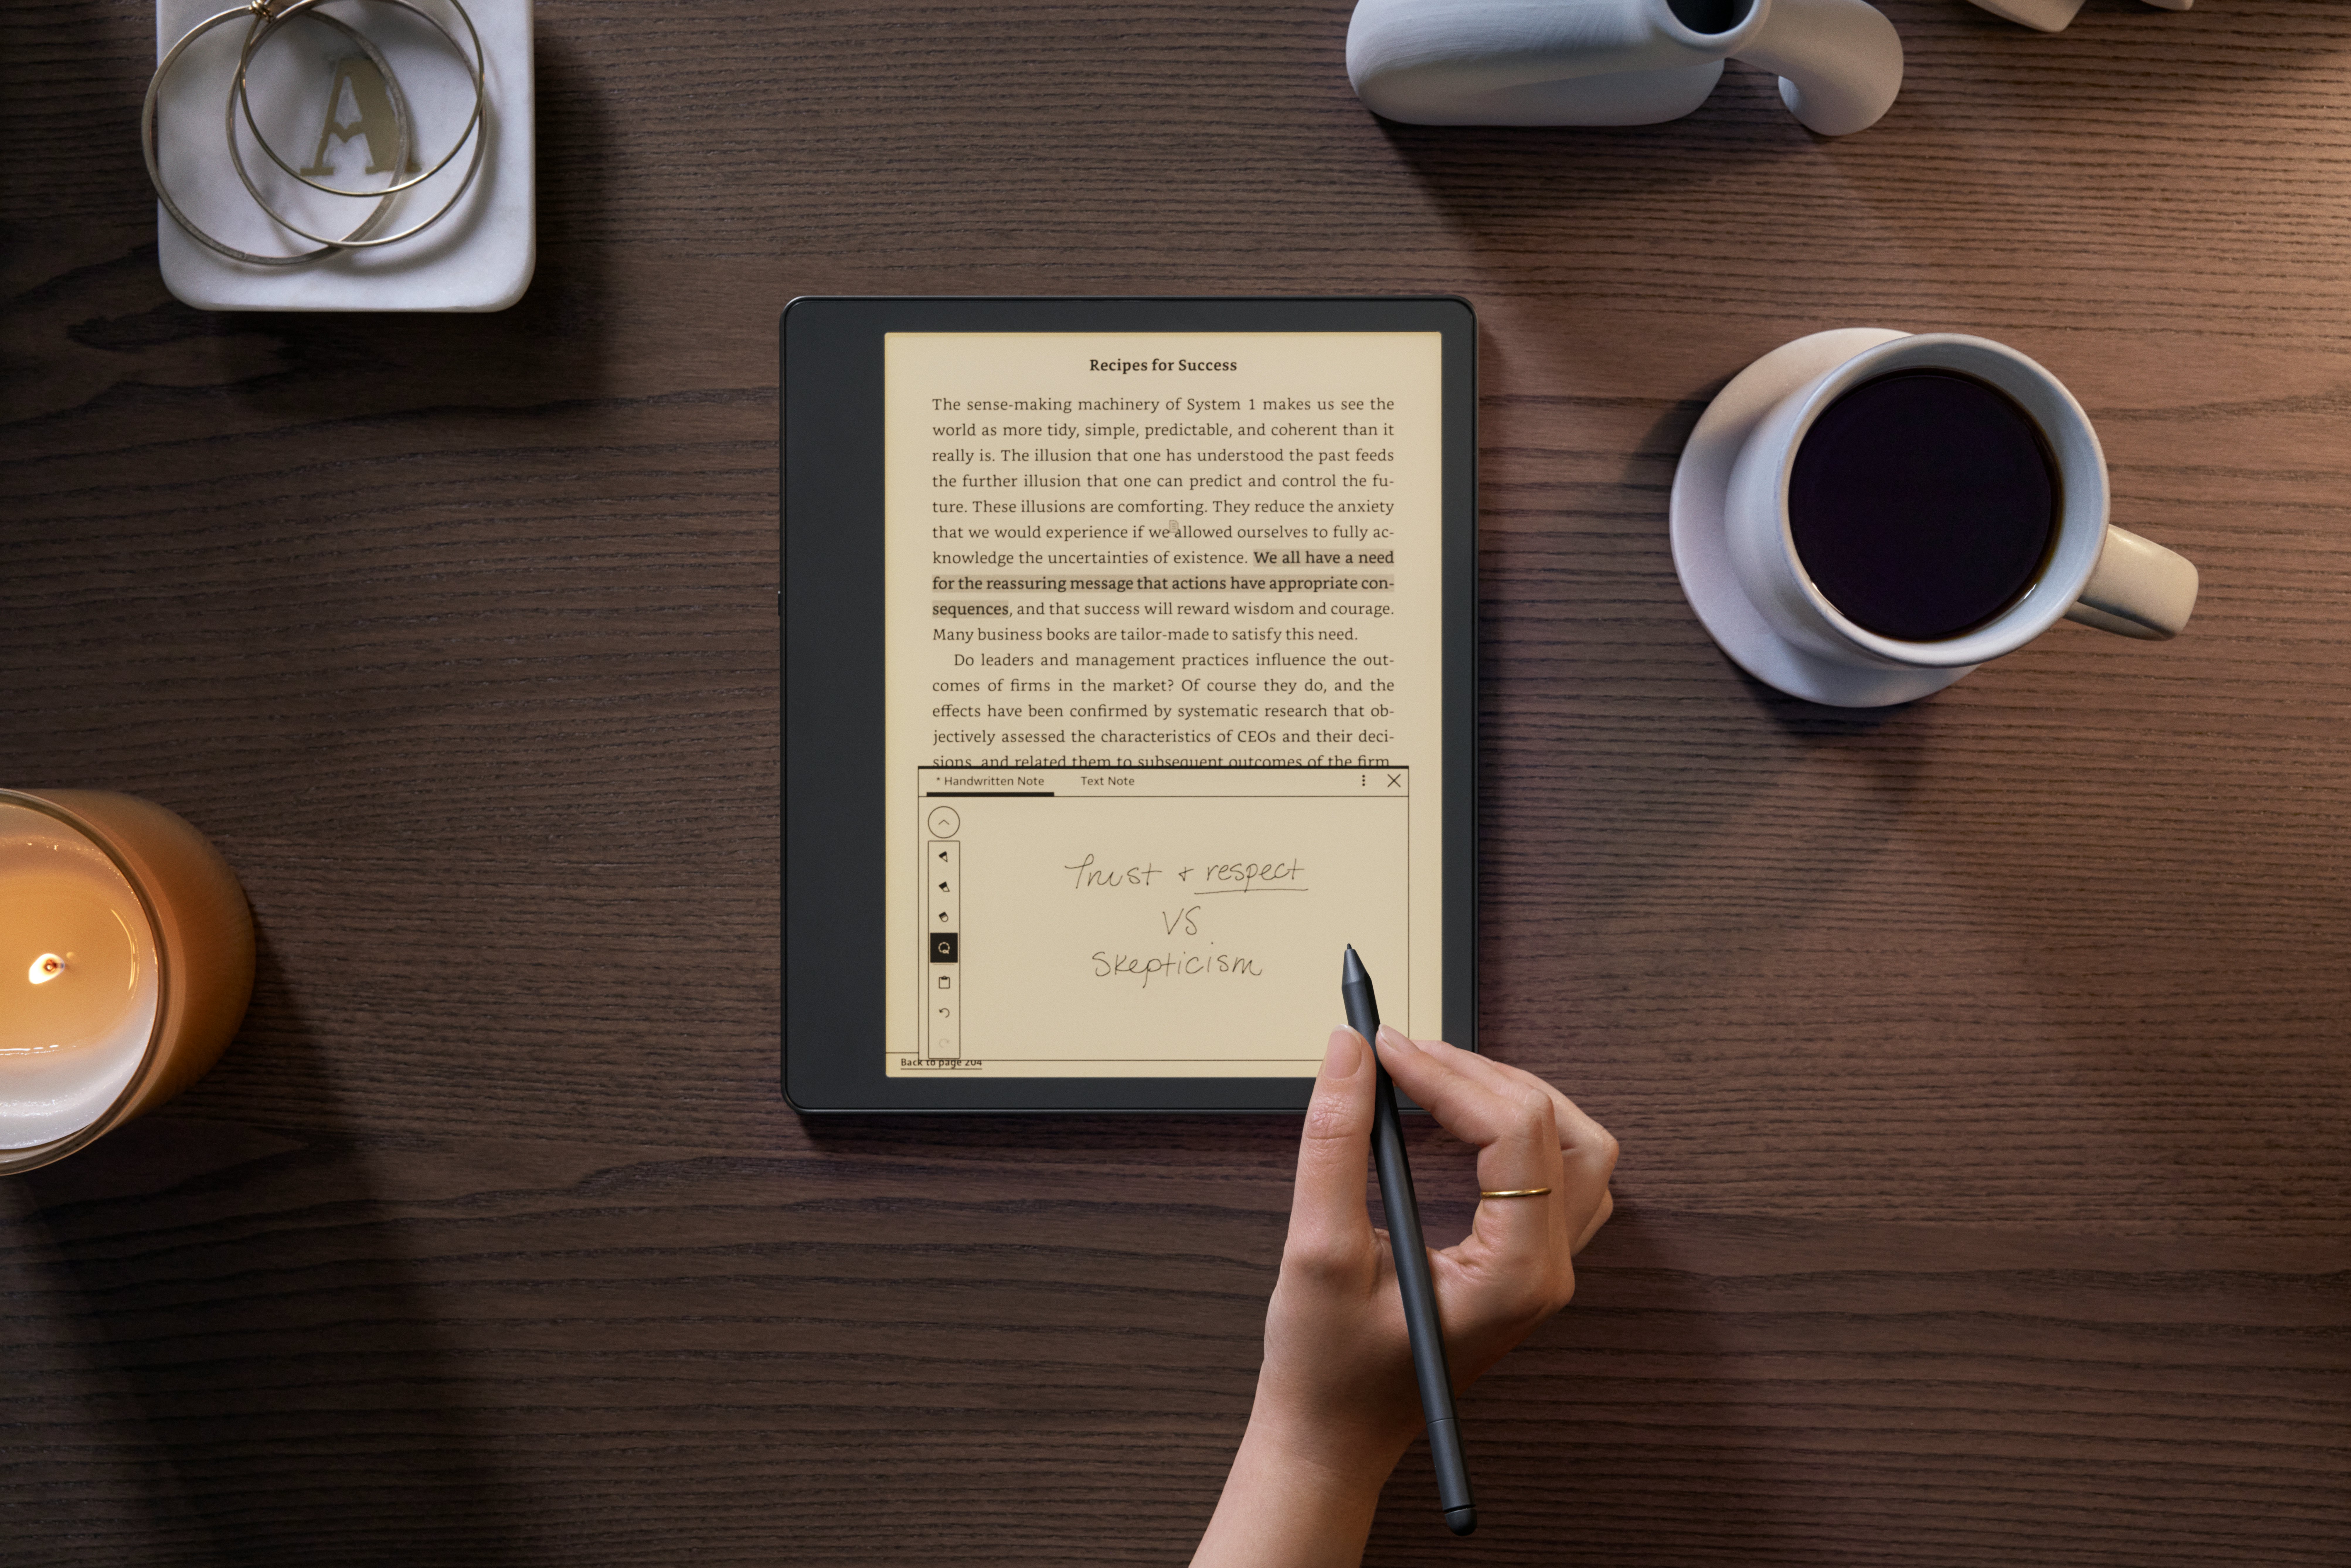 A big update brings the Kindle Scribe closer to being good - The Verge